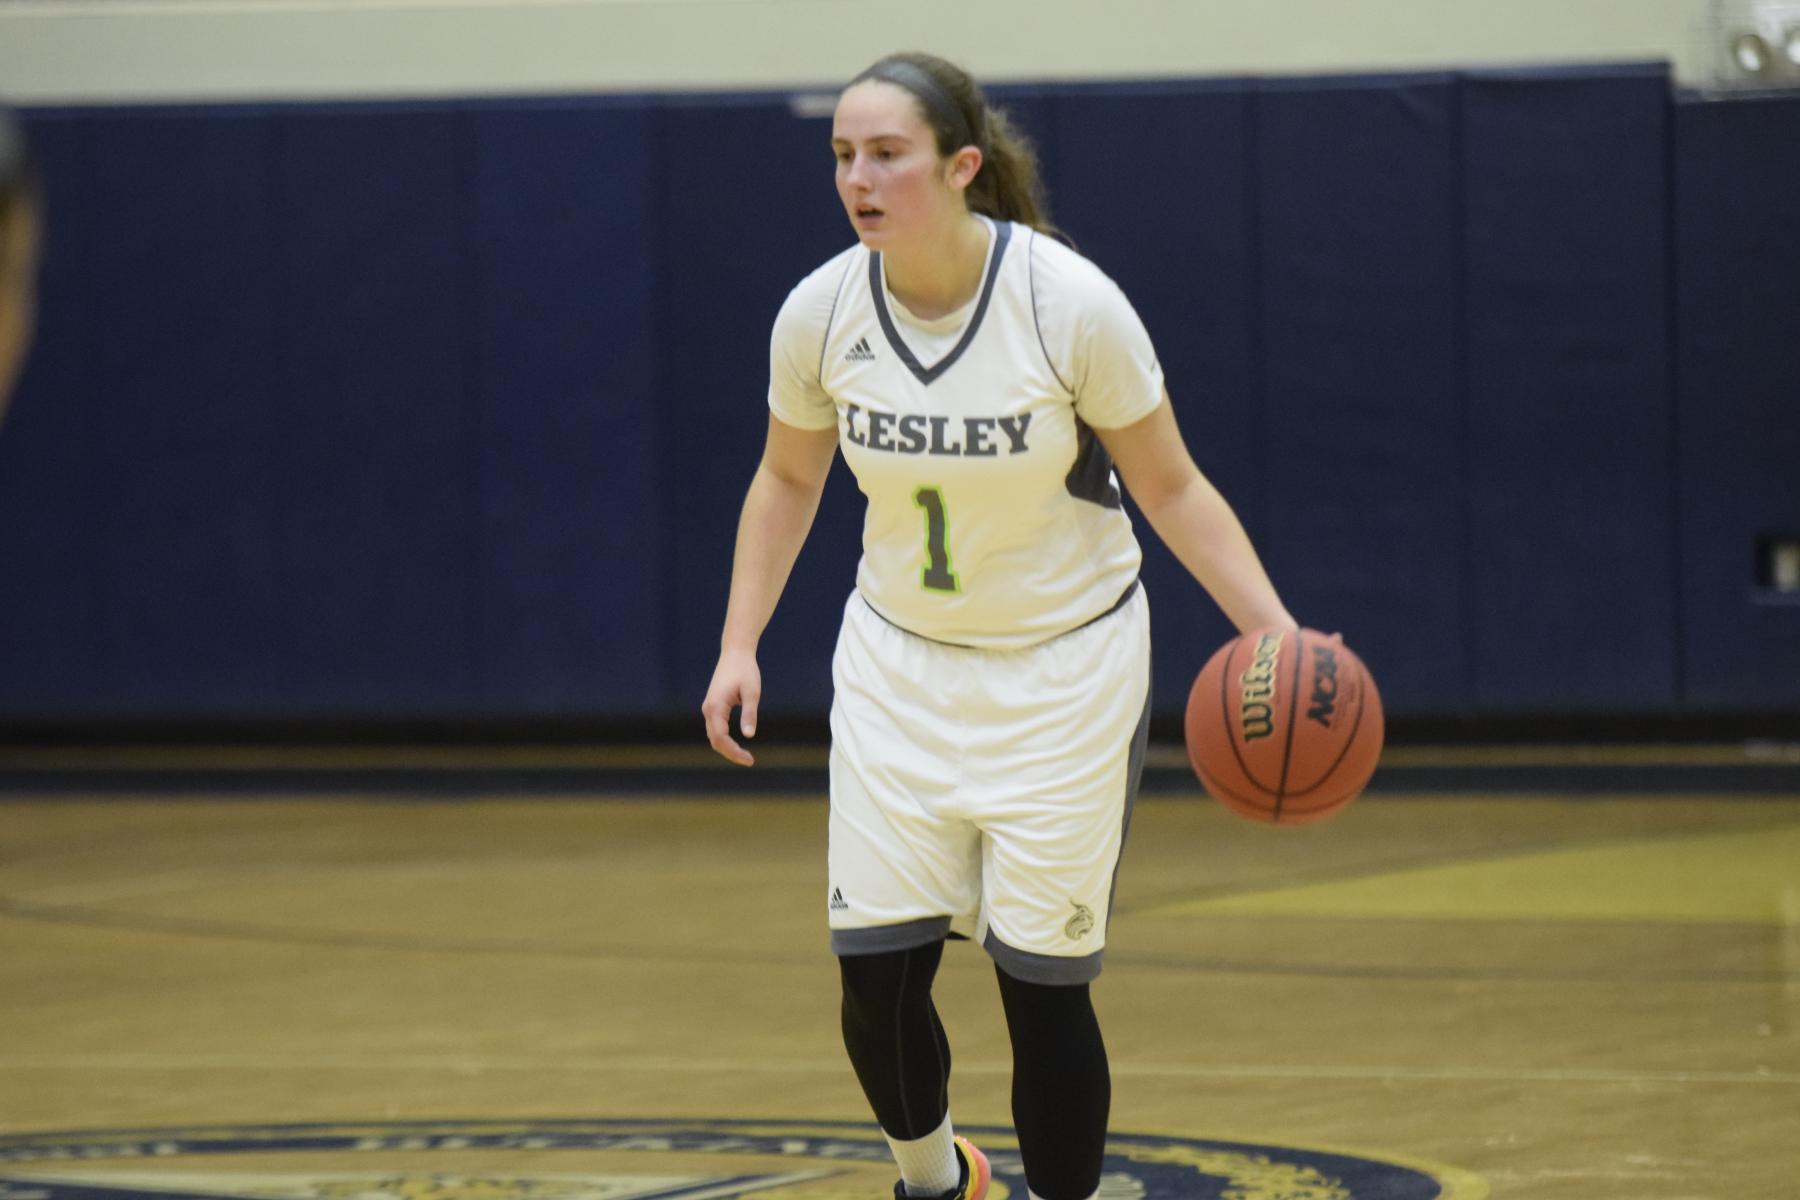 Regis Races Past Women's Basketball; Dimou With Career-High 23